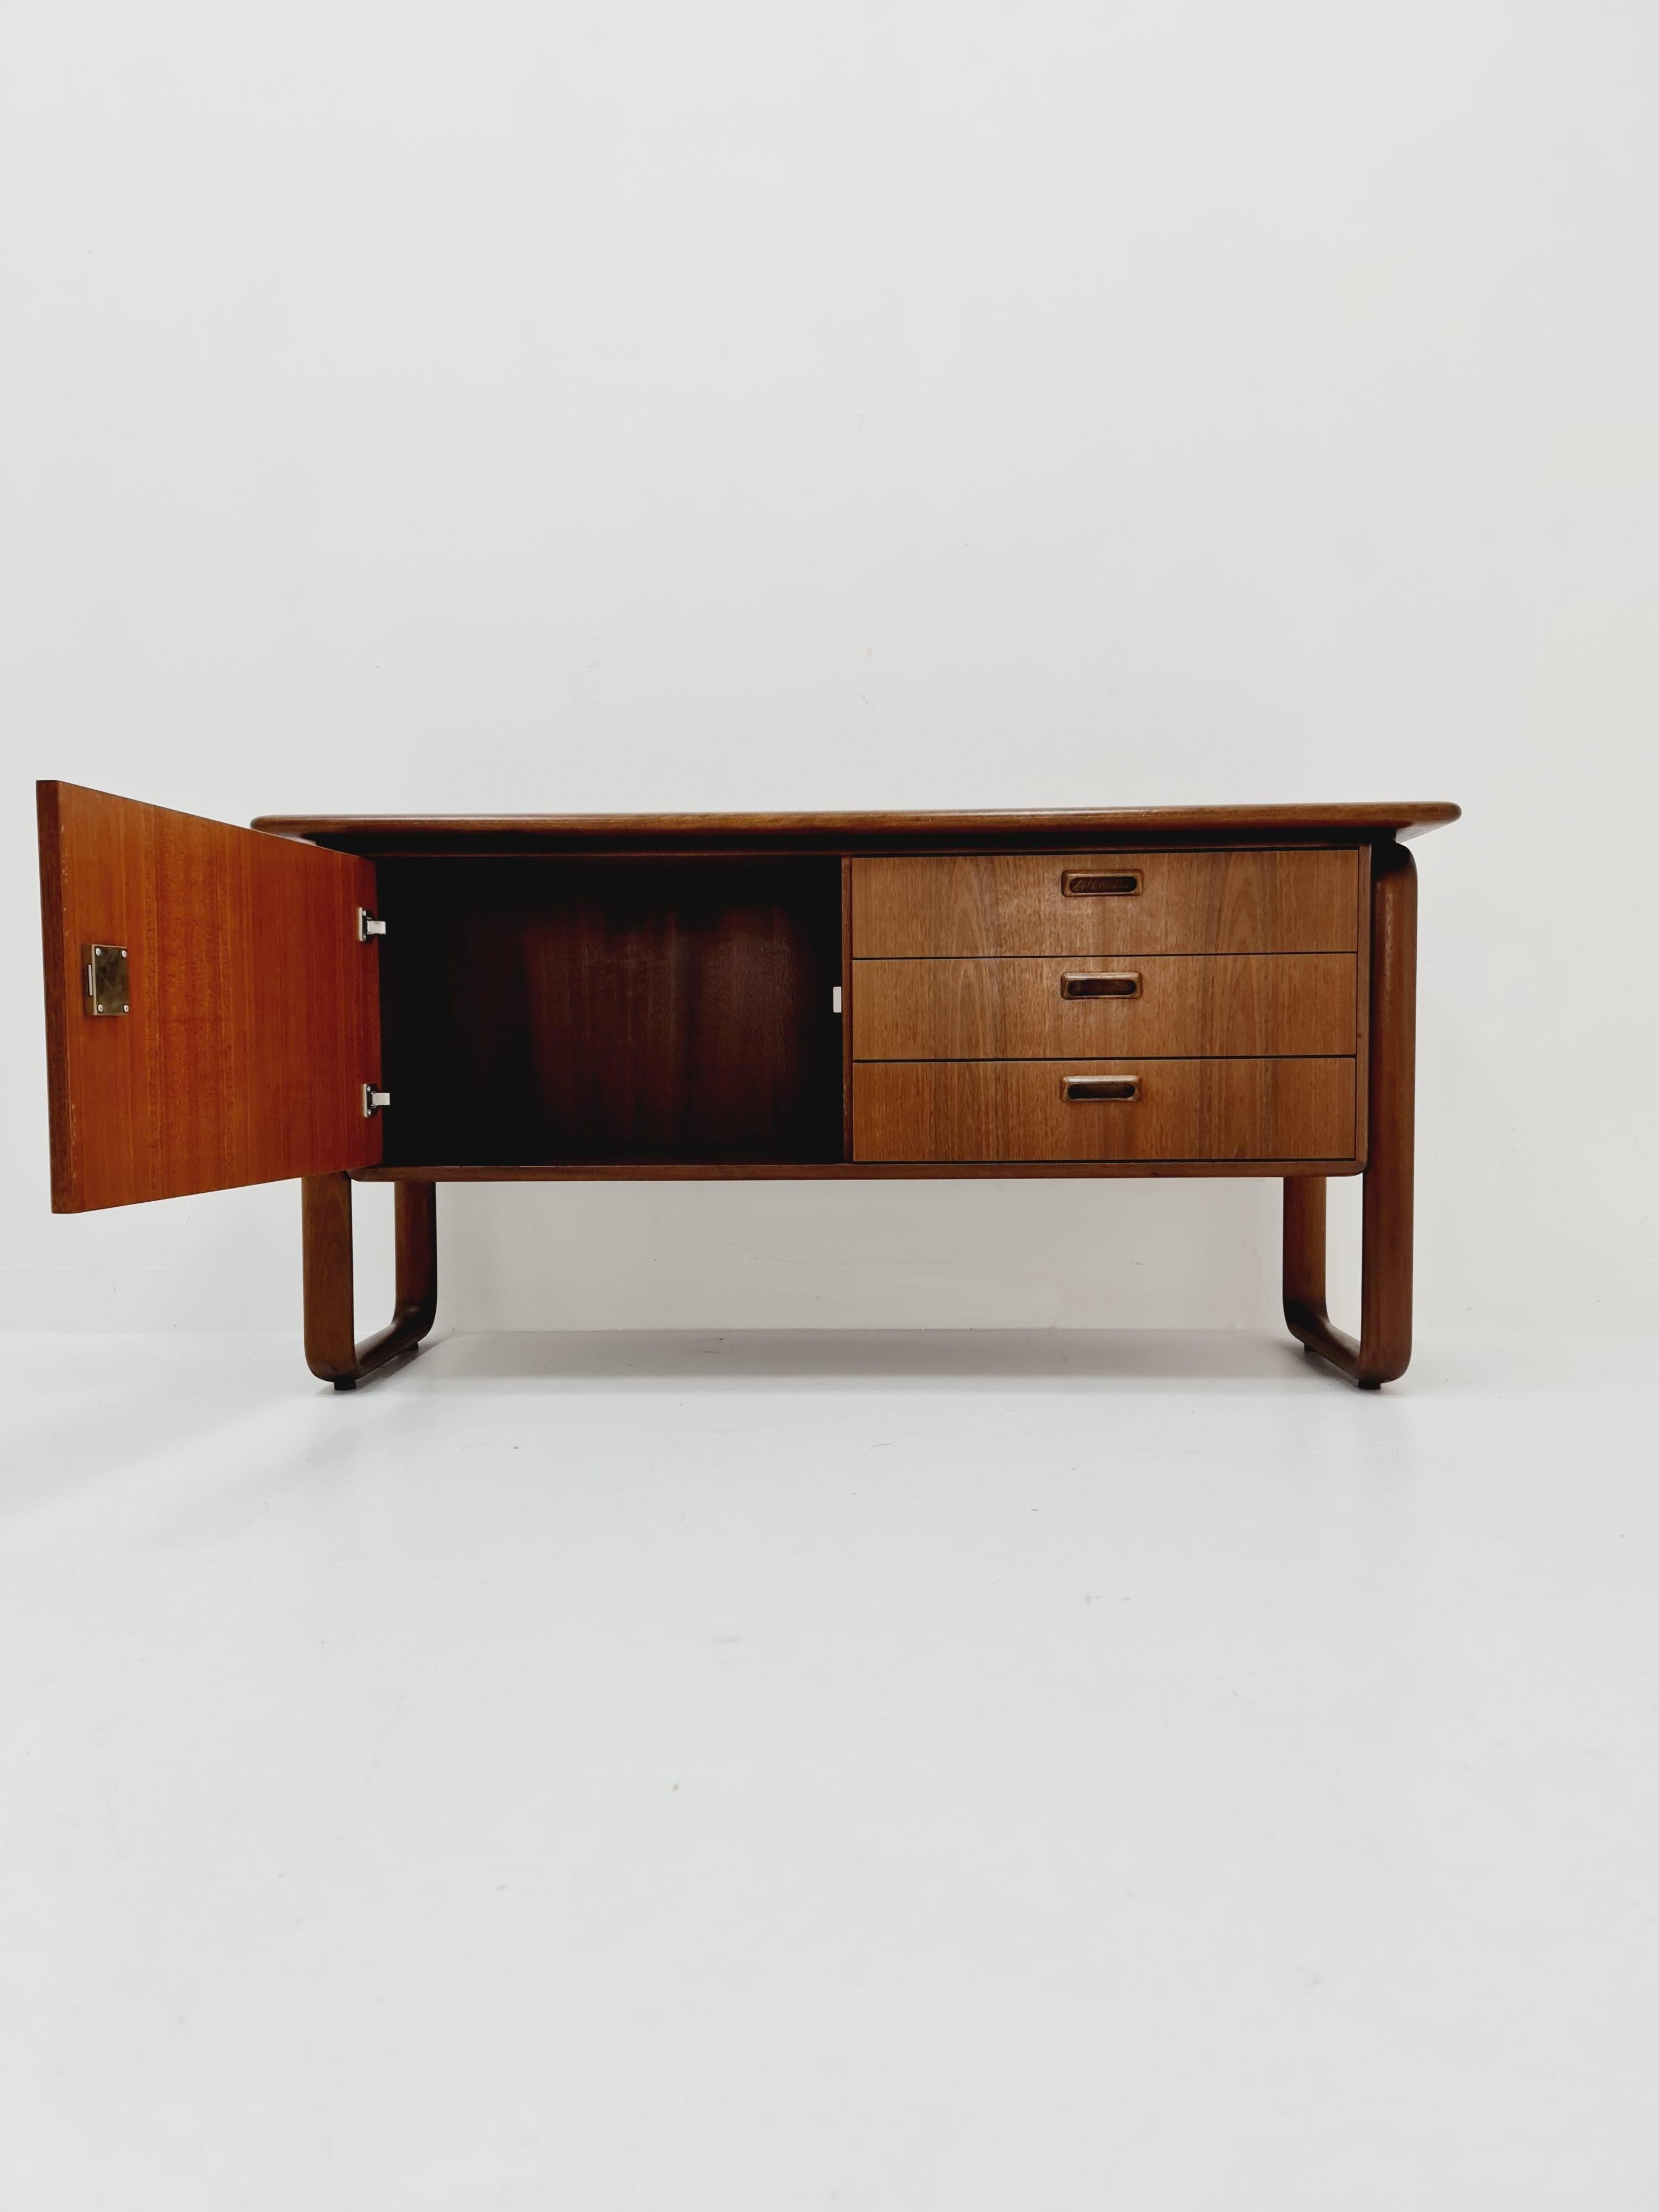 German solid Teak Sideboard By Burkhard for Rosenthal , 1960s

Danish Design

Dimensions: 
52 D x 140  W x 68  H cm

It is in good vintage condition, however, as with all vintage items some minor wear marks should be expected.

Please inquiry for